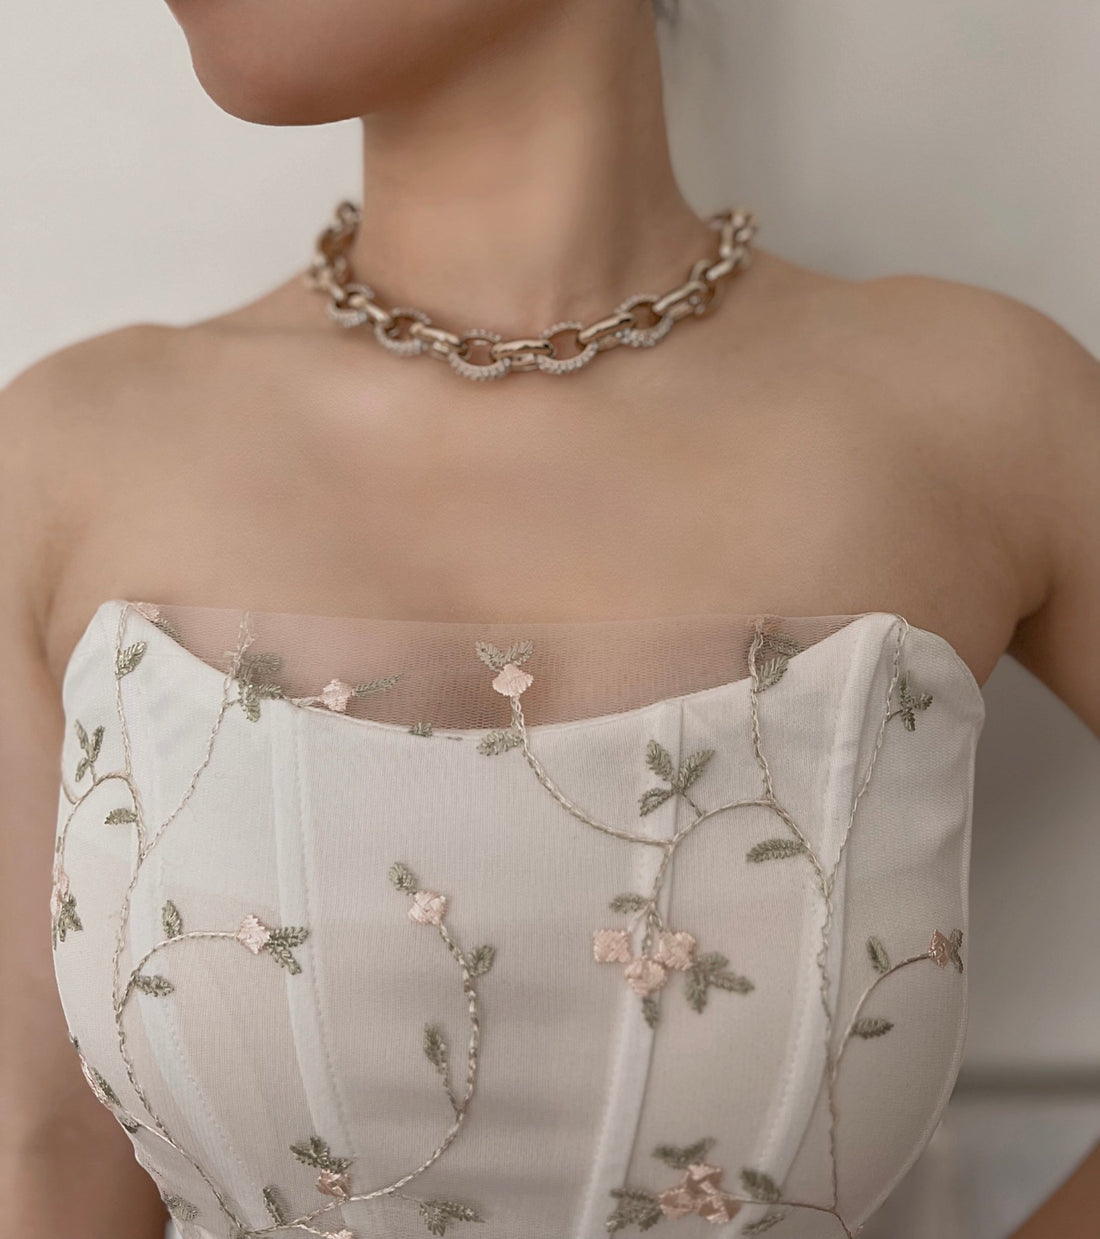 Choosing the Most Complementary Necklace Style for Your Neckline - KORYANGS